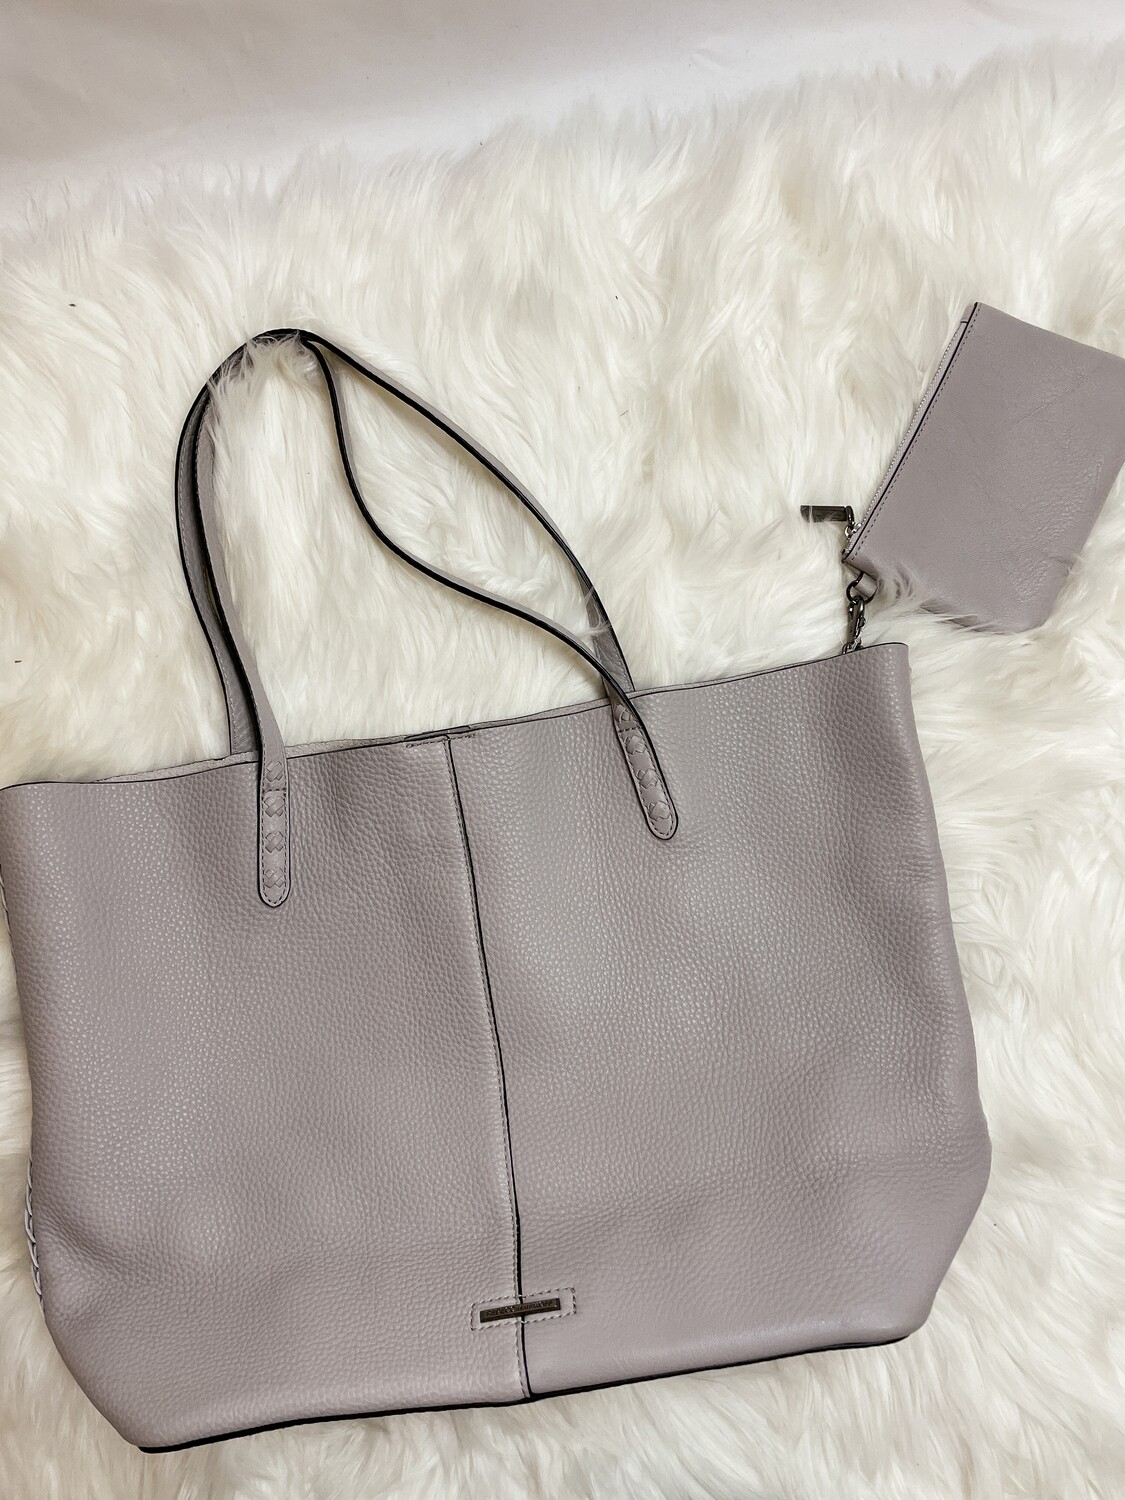 Rebecca Minkoff Grey Unlined Leather Tote